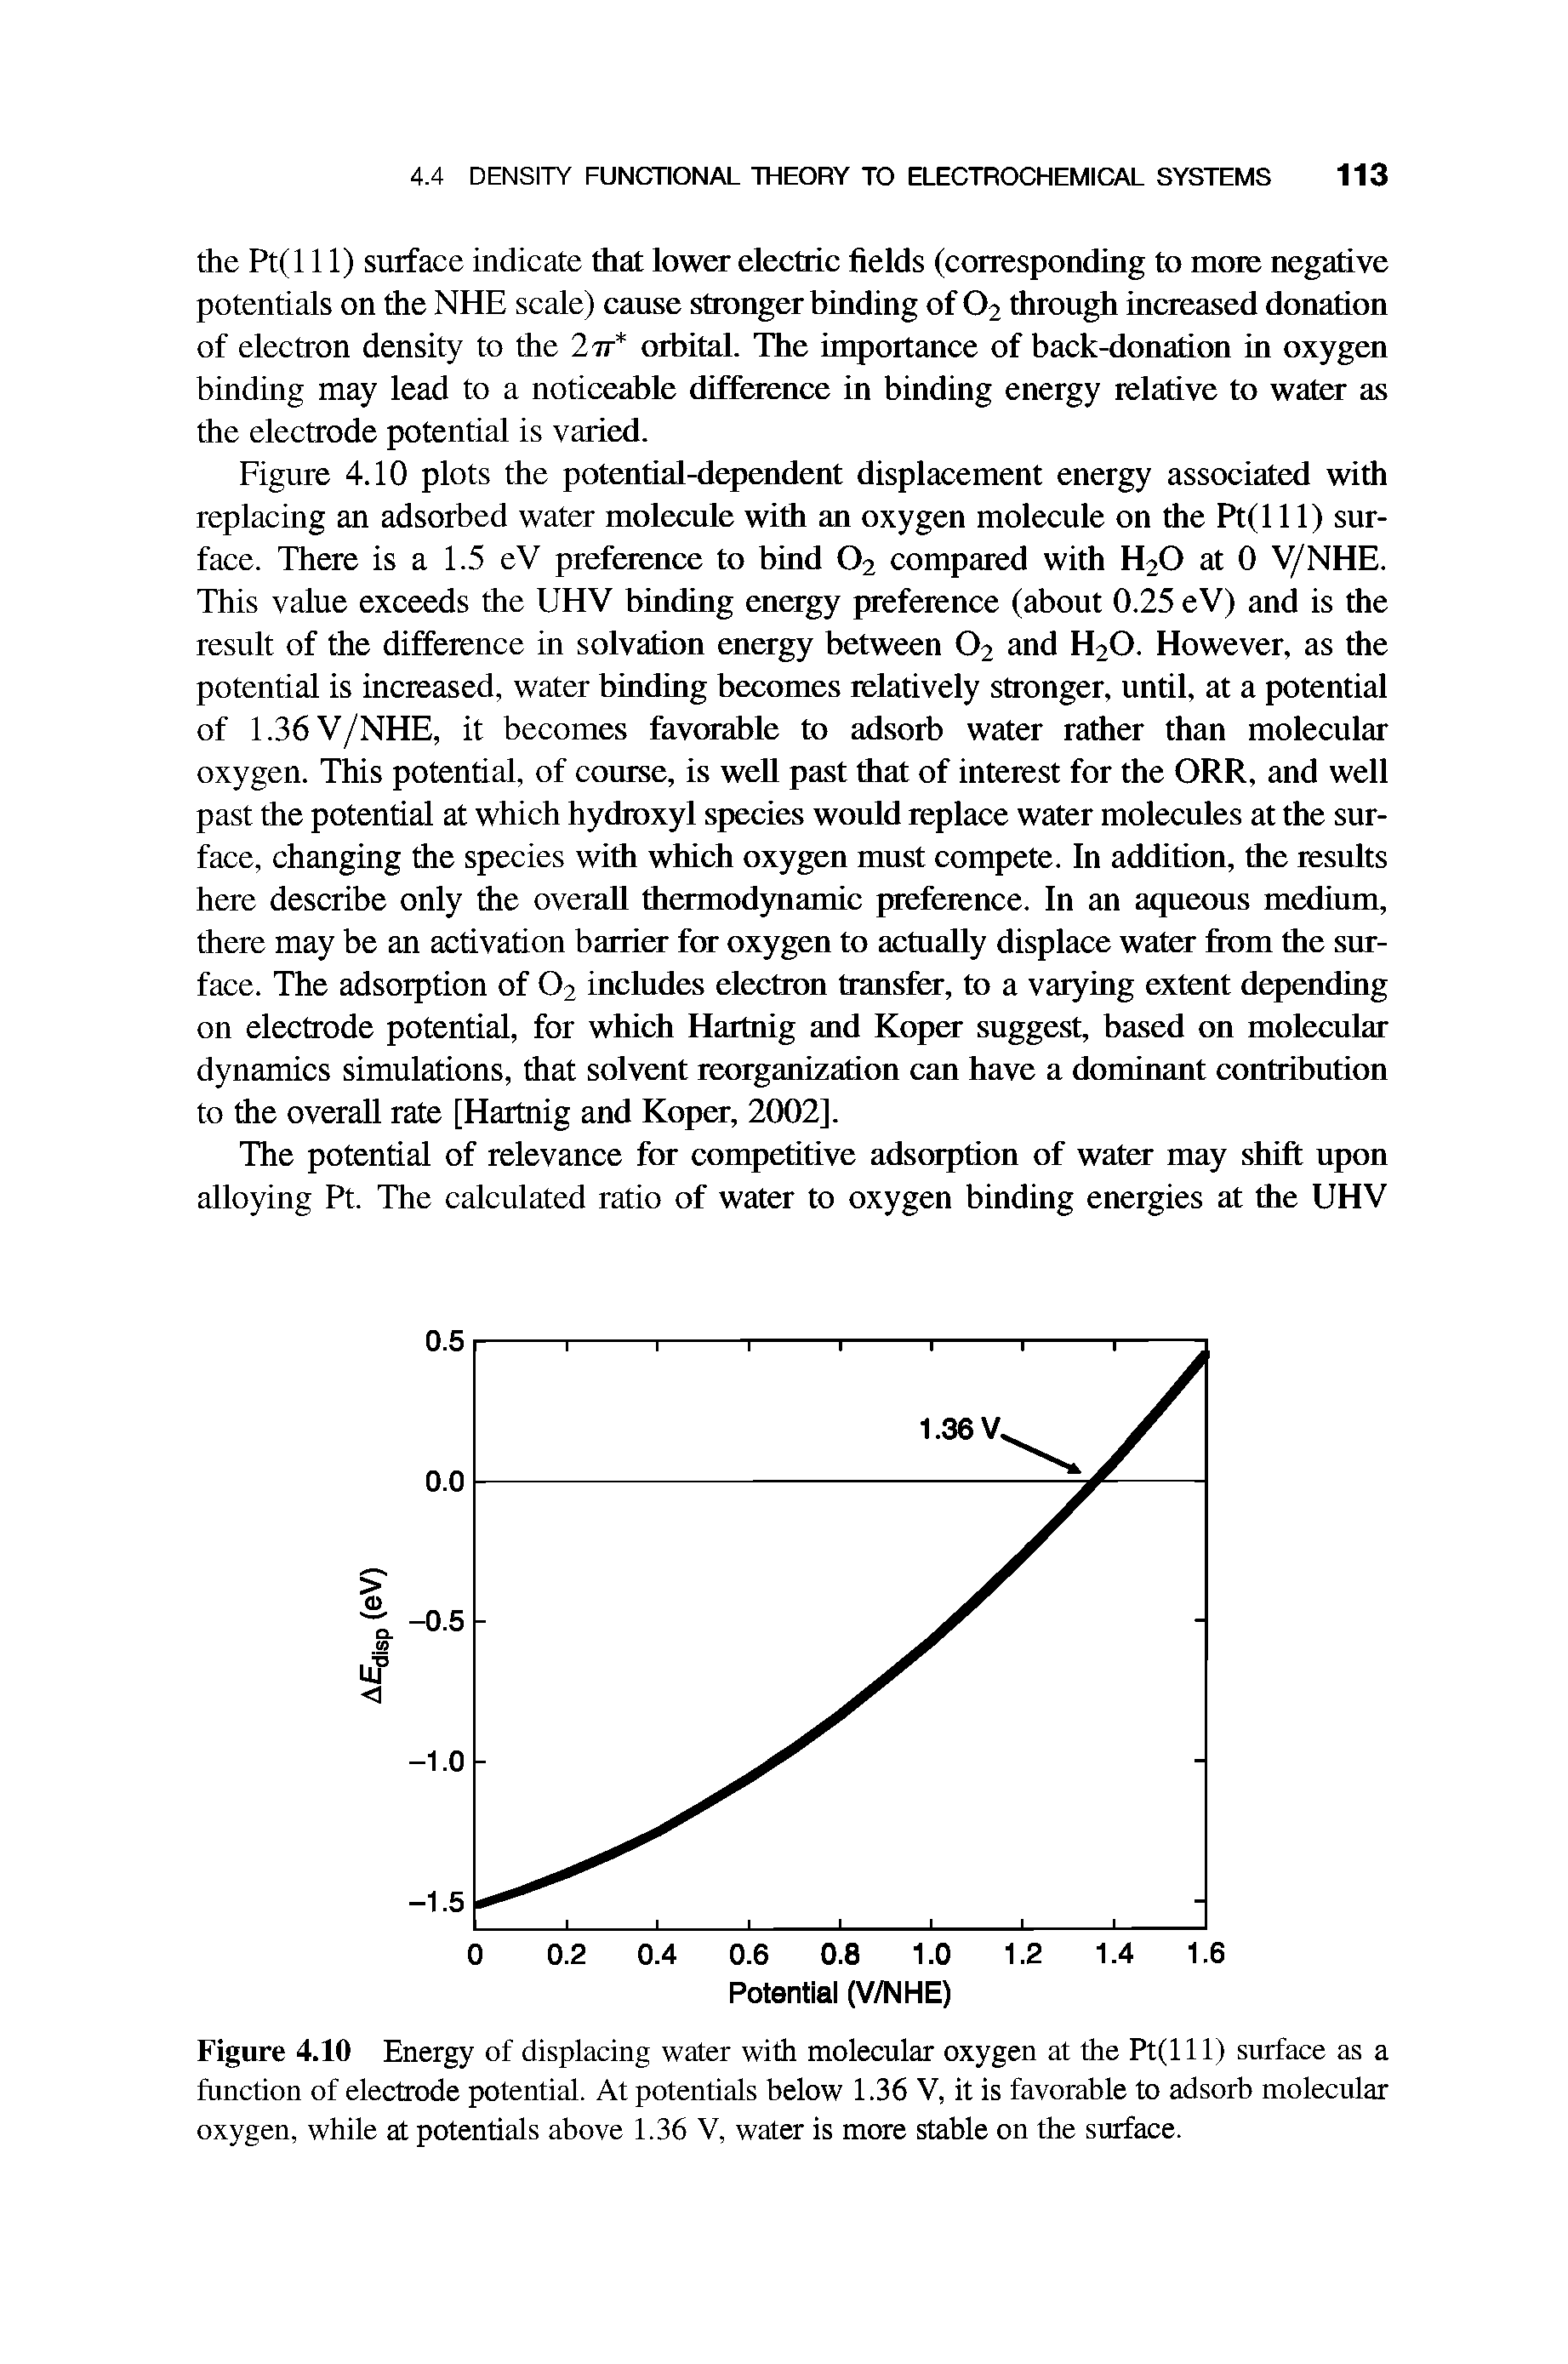 Figure 4.10 Energy of displacing water with molecular oxygen at the Pt(lll) surface as a function of electrode potential. At potentials below 1.36 V, it is favorable to adsorb molecular oxygen, while at potentials above 1.36 V, water is more stable on the surface.